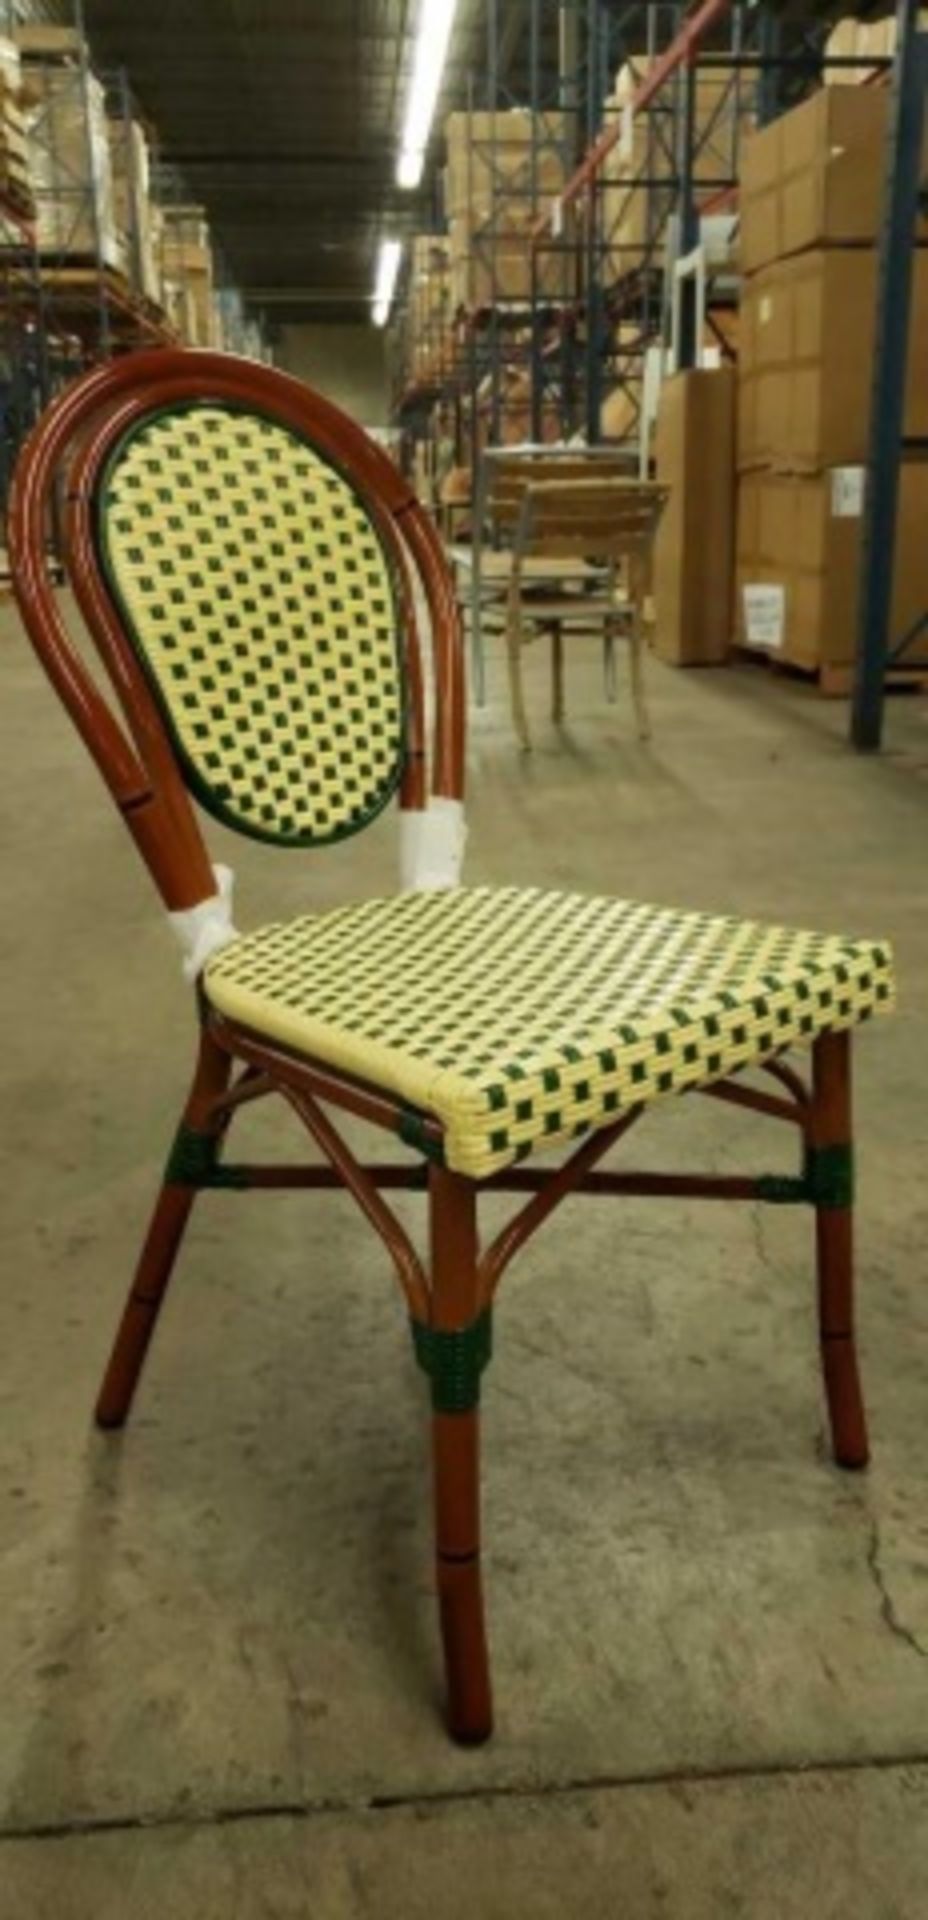 Parisienne Side Chair - Ivory/Green, A57-SC IG. PE Weave on Tubular Aluminum Frame/Powder coat - Image 4 of 7